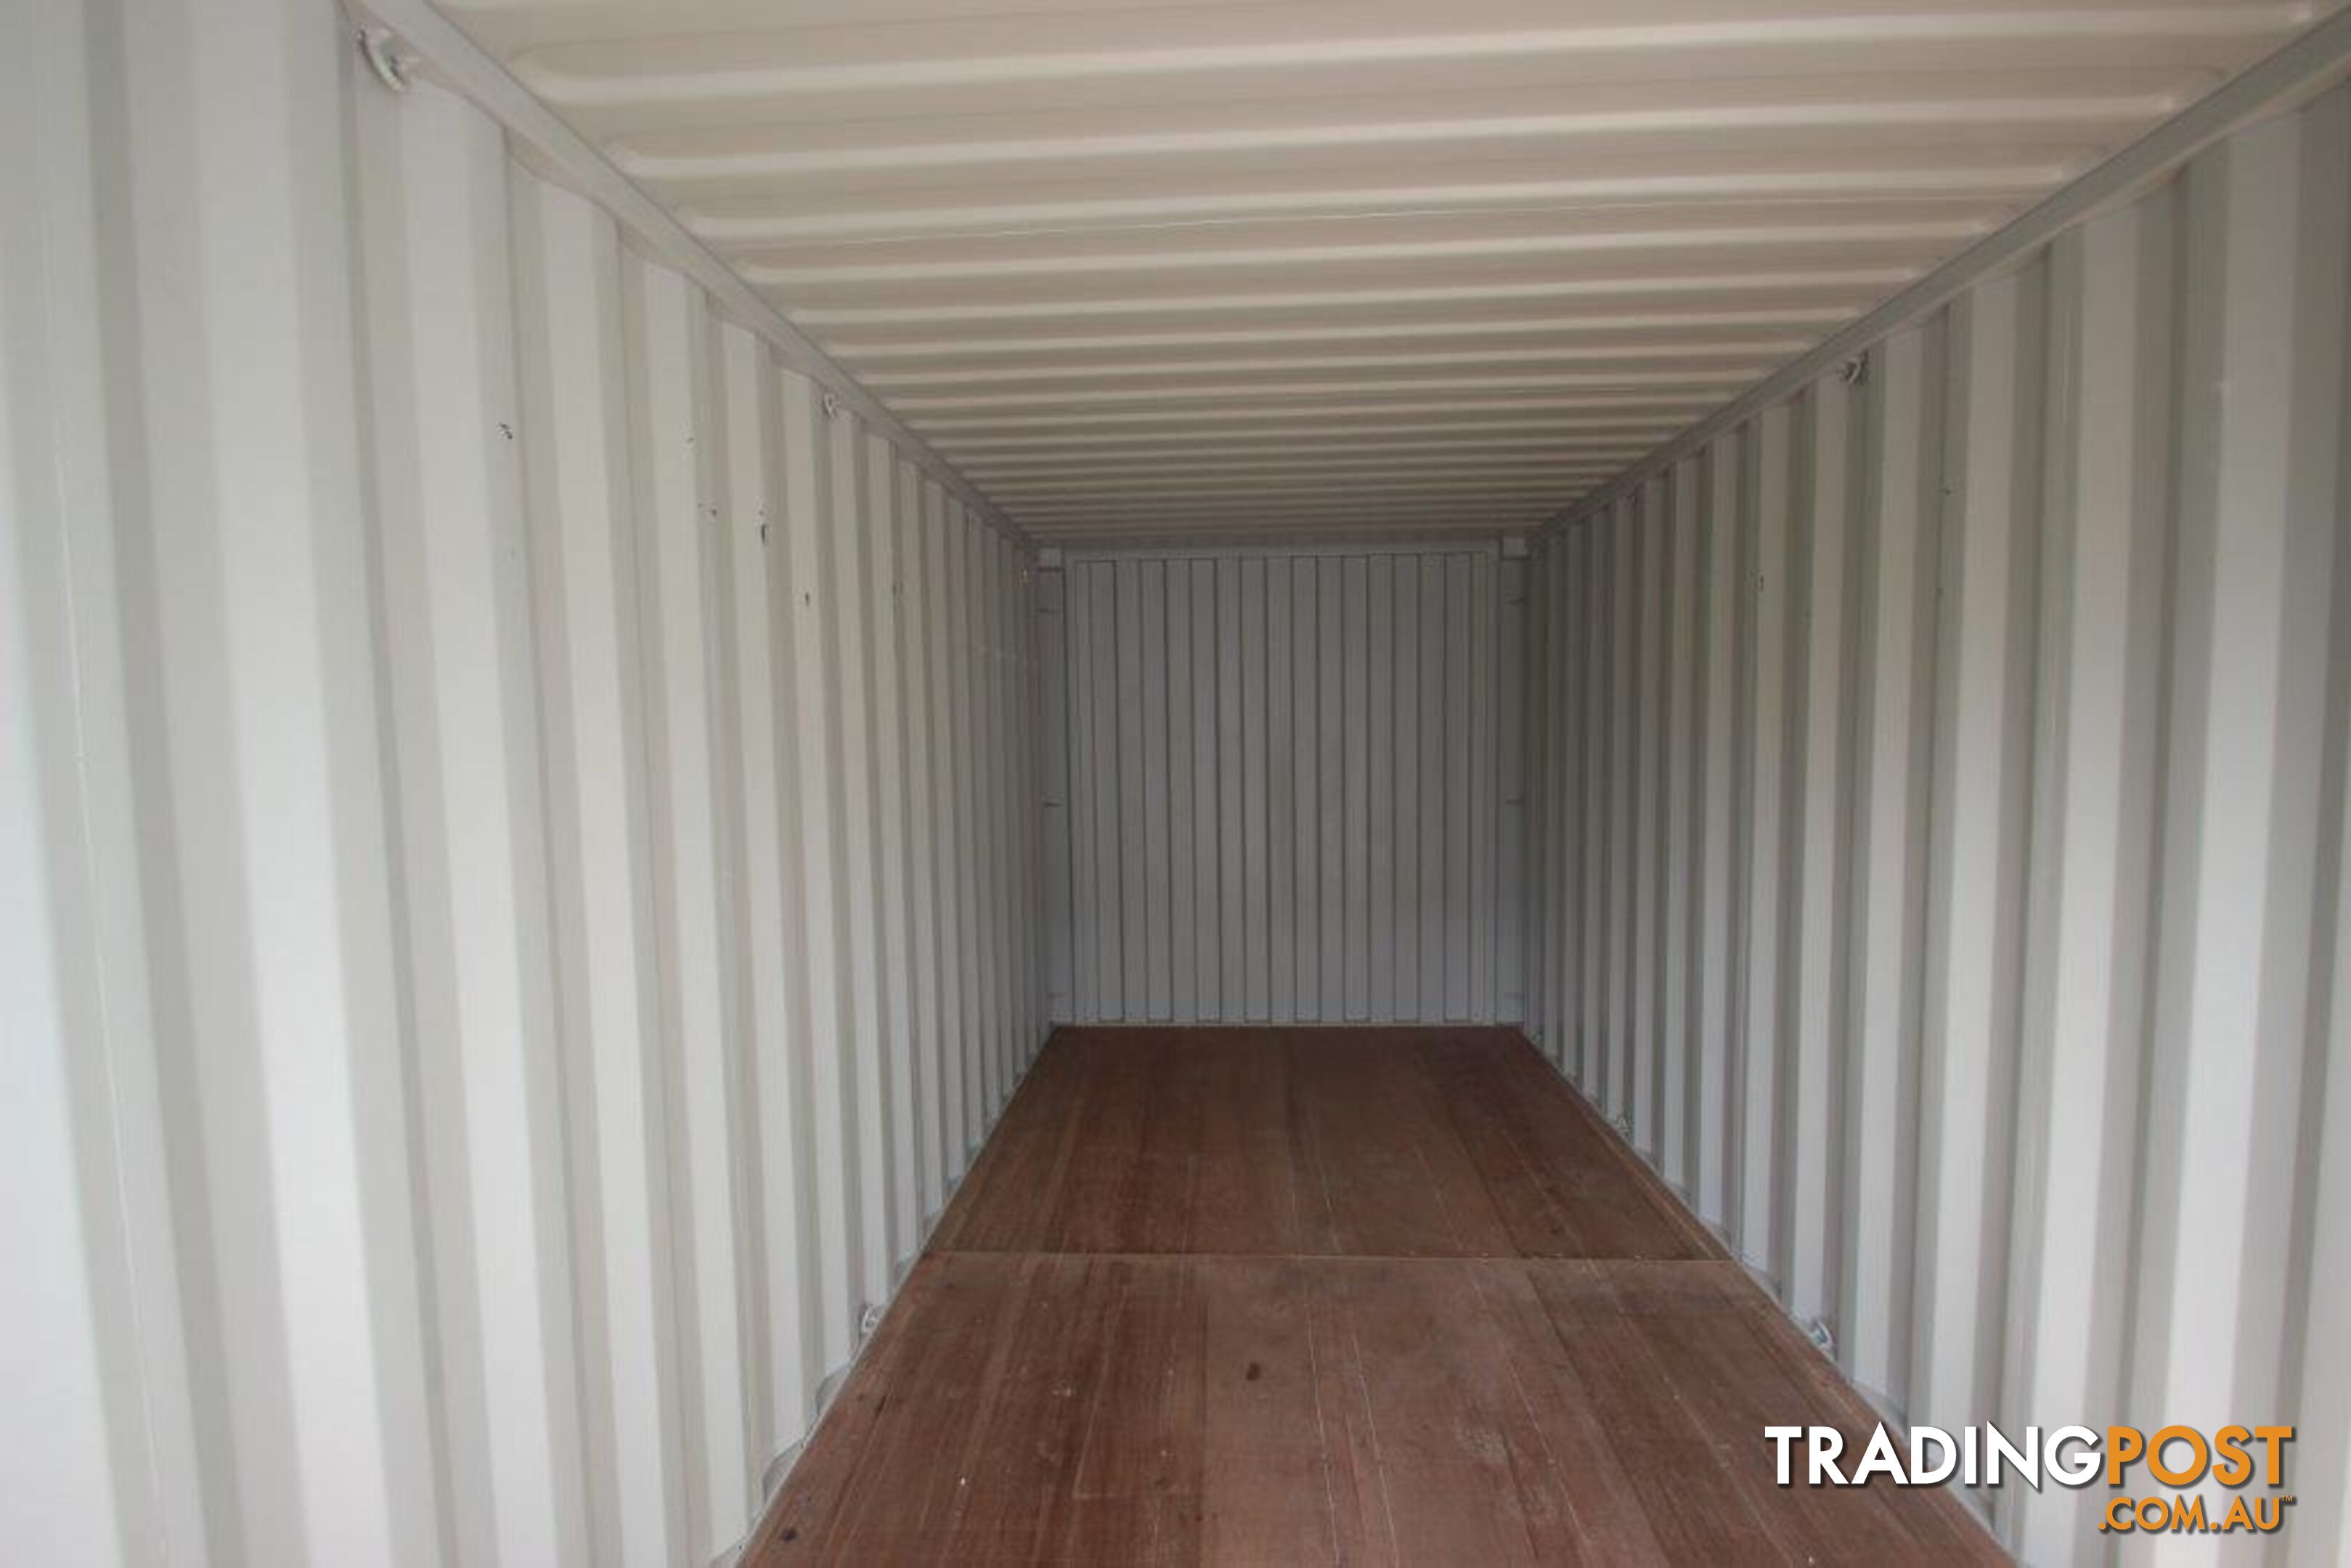 New 20ft Shipping Containers Bundaberg - From $6550 + GST